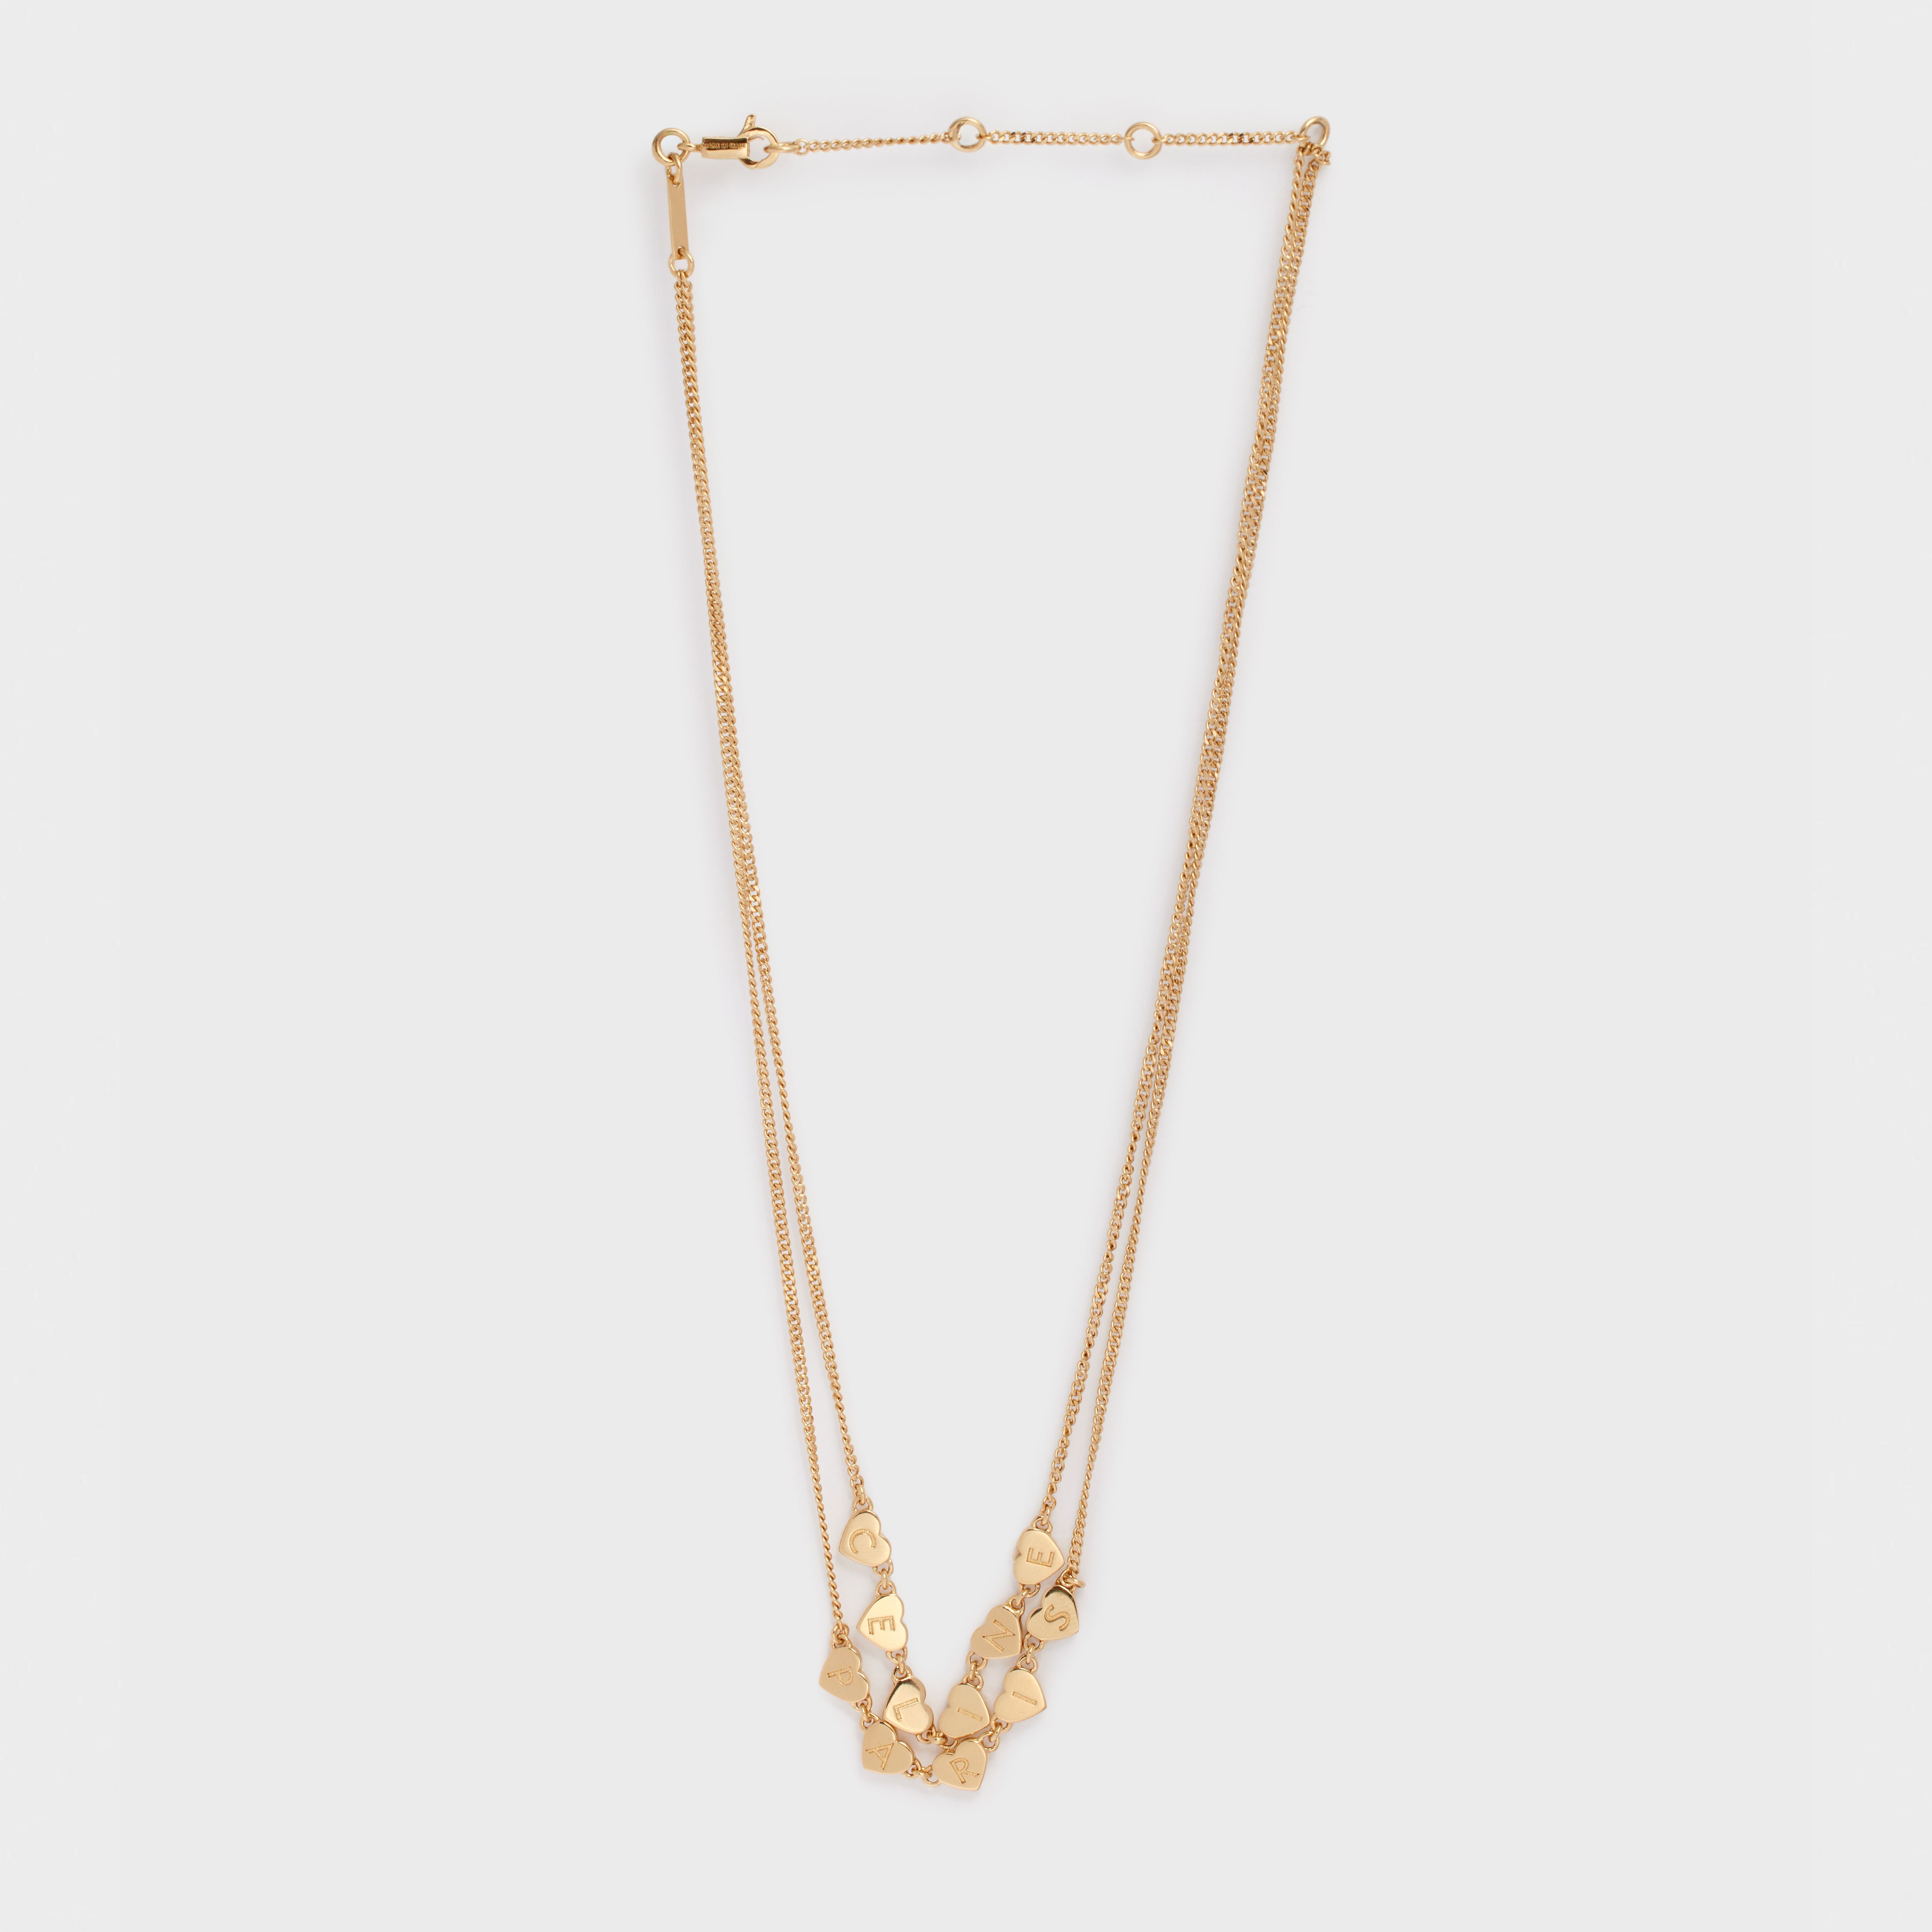 CELINE CŒUR CELINE DOUBLE NECKLACE IN BRASS WITH GOLD FINISH GOLD